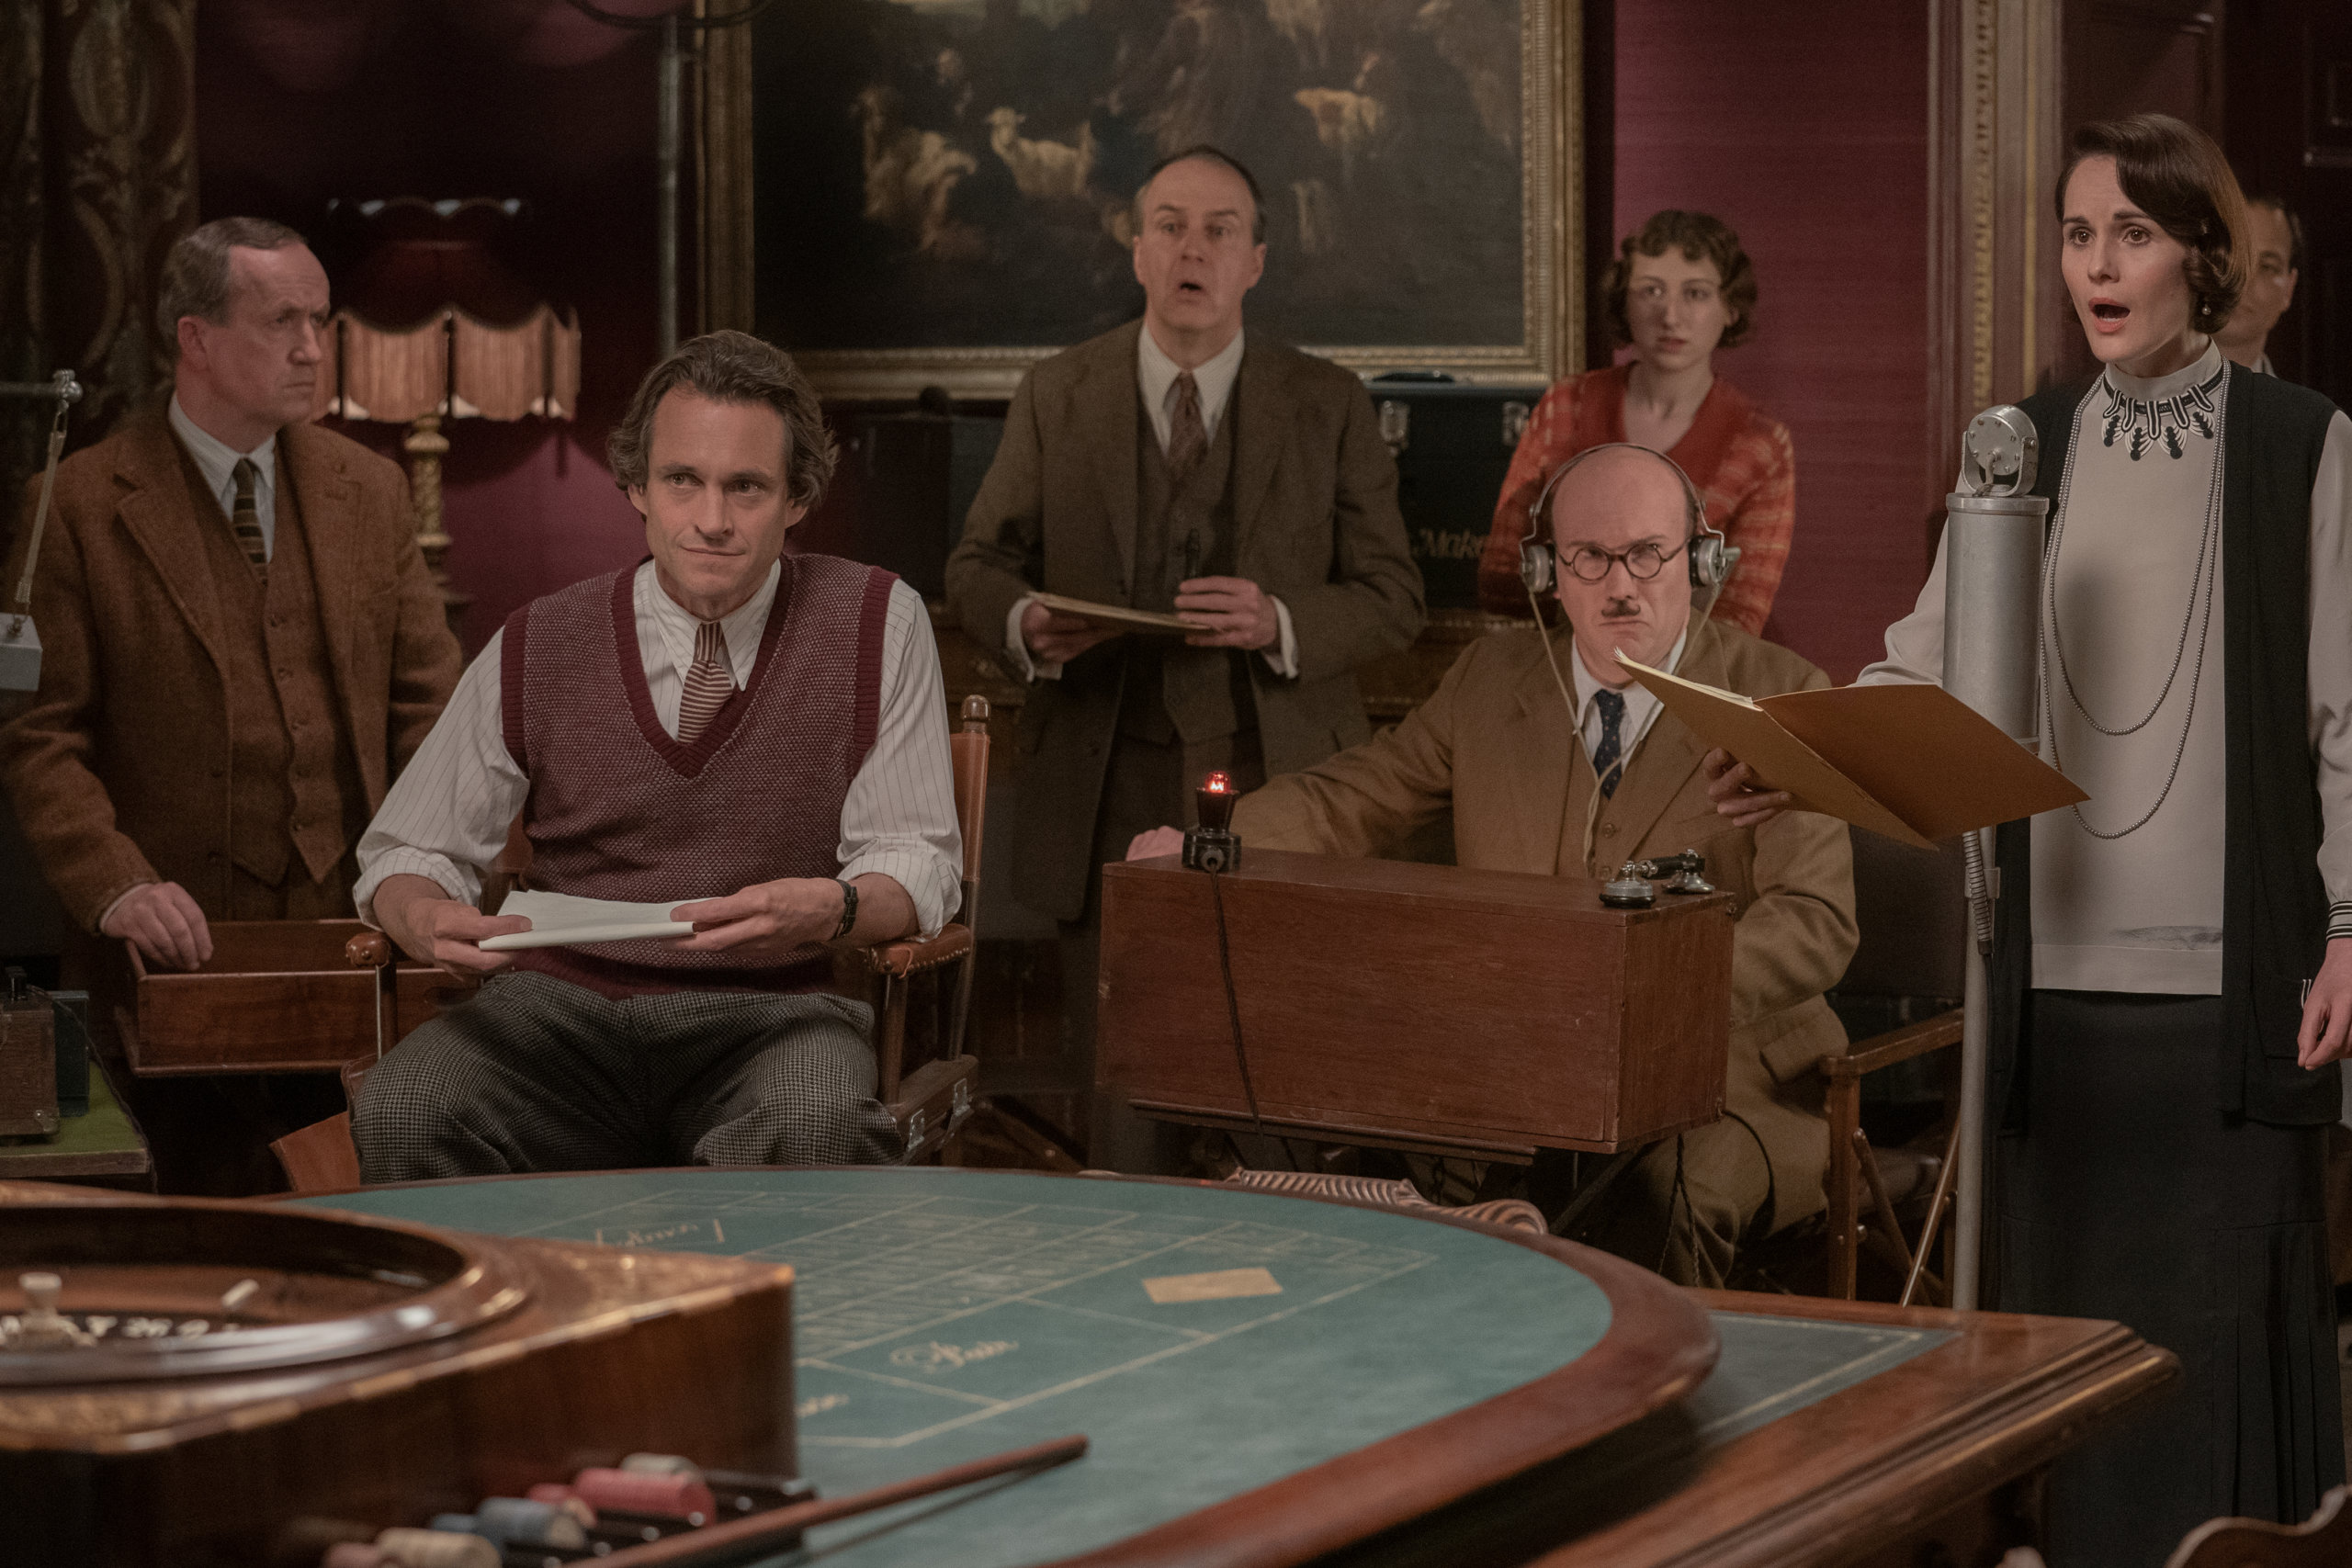 (Left to right) Hugh Dancy stars as Jack Barber, Kevin Doyle as Mr. Molesley, Alex MacQueen as Mr. Stubbins and Michelle Dockery as Lady Mary in "Downton Abbey: A New Era"